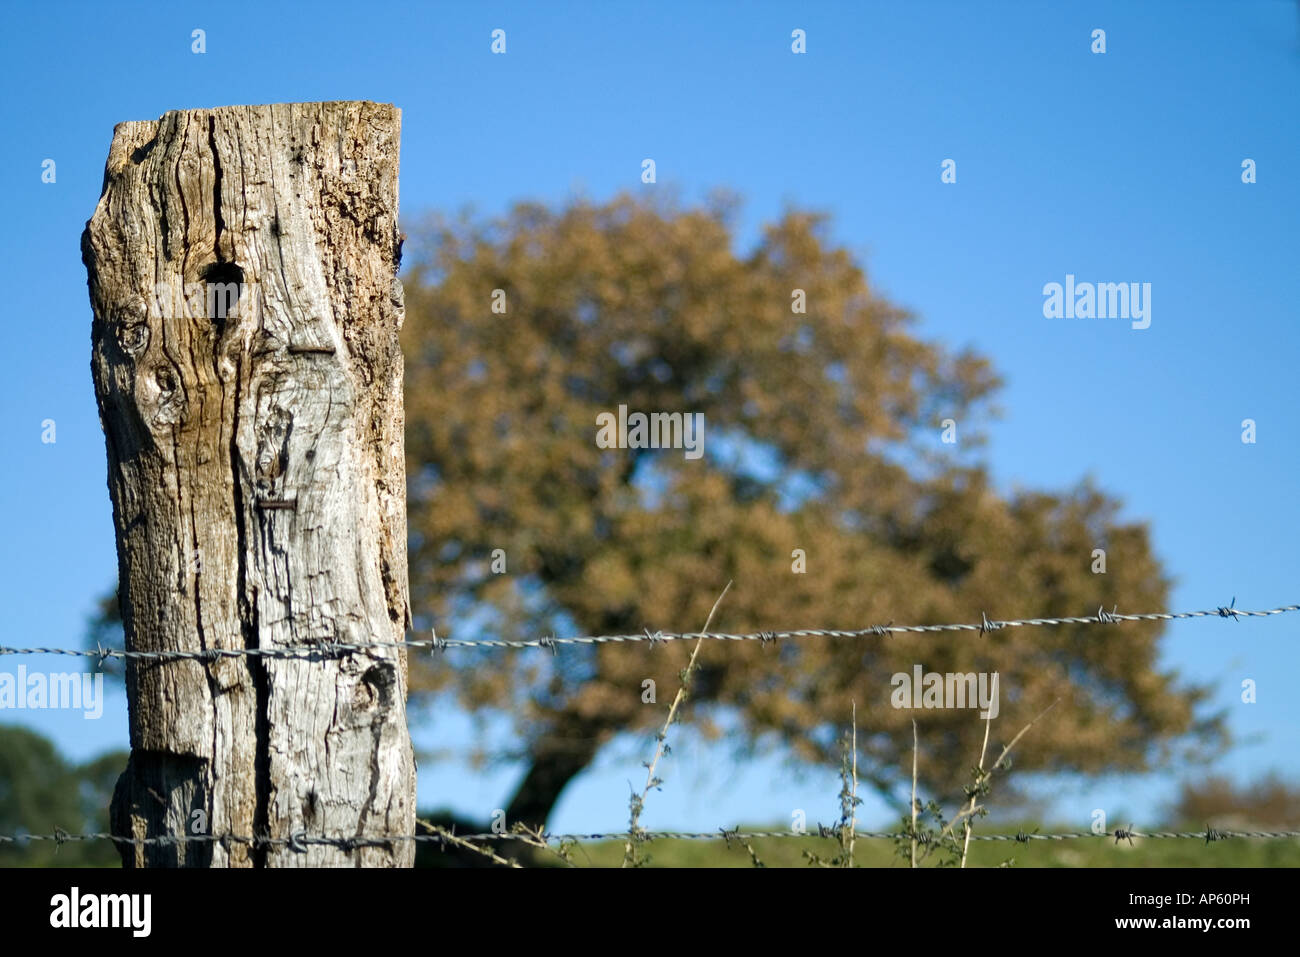 blur oak behind a wire fence Stock Photo